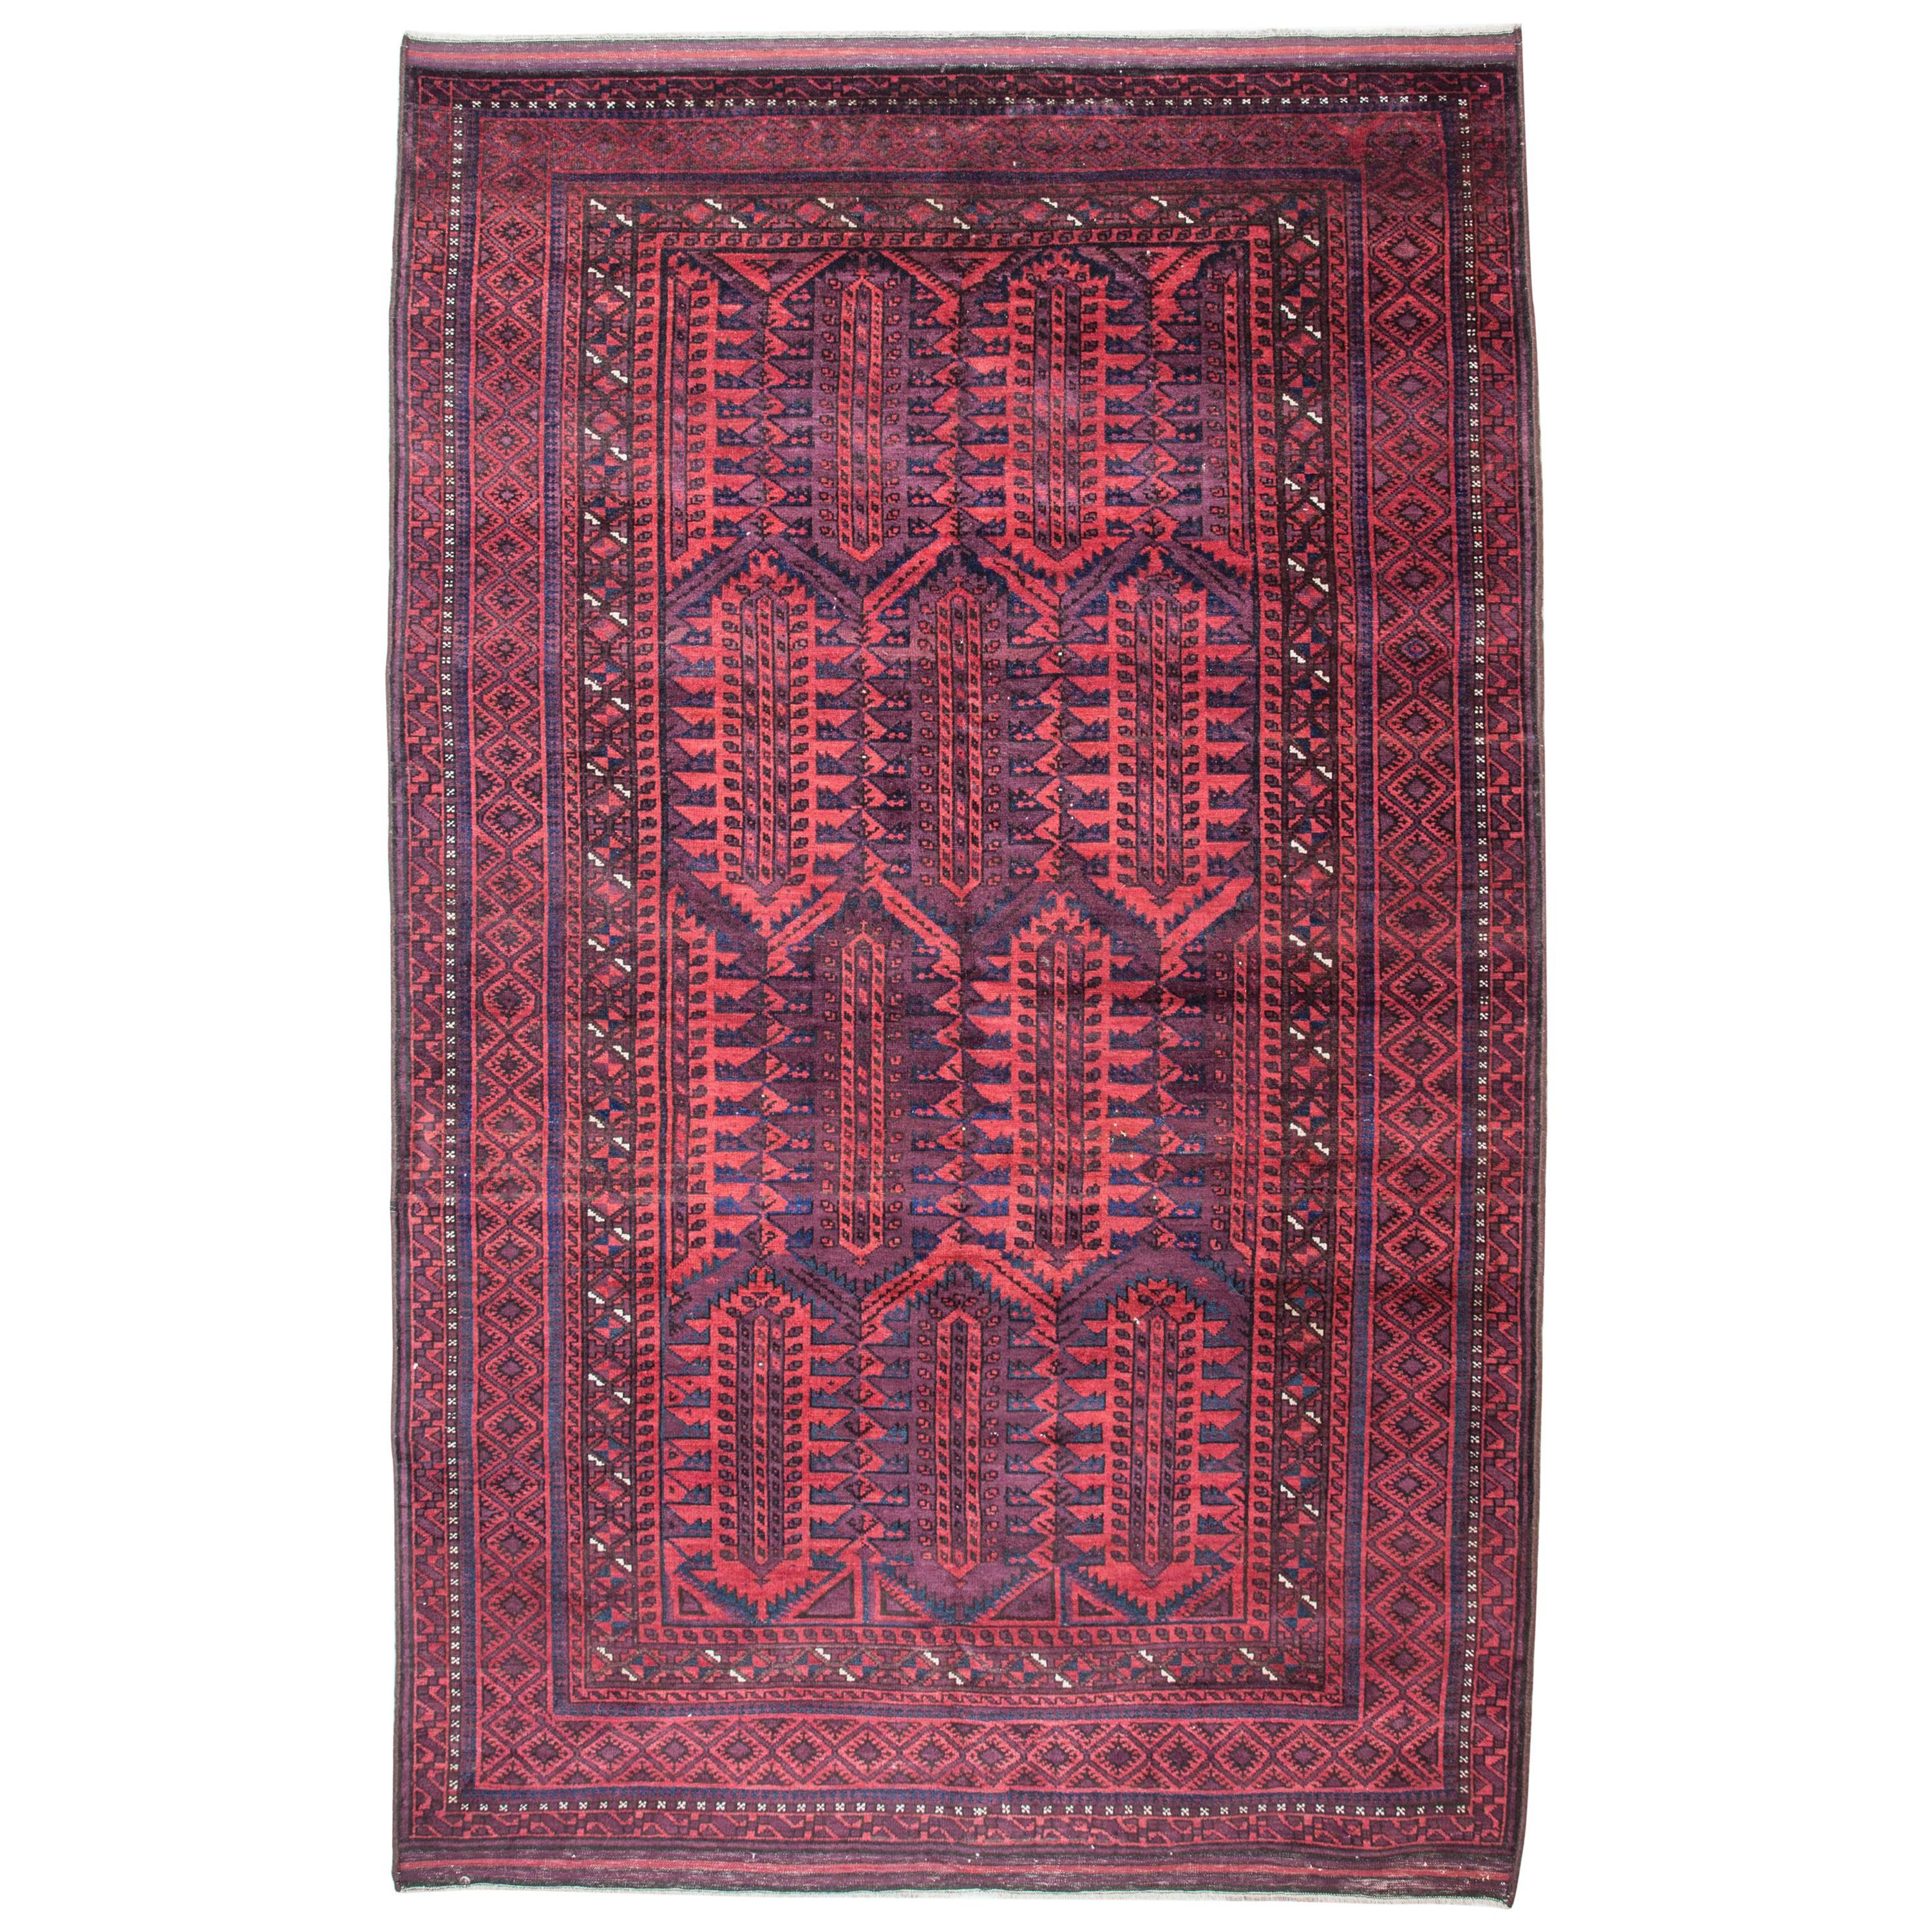 Early 20th Century Baluch Main Rug in Full Pile